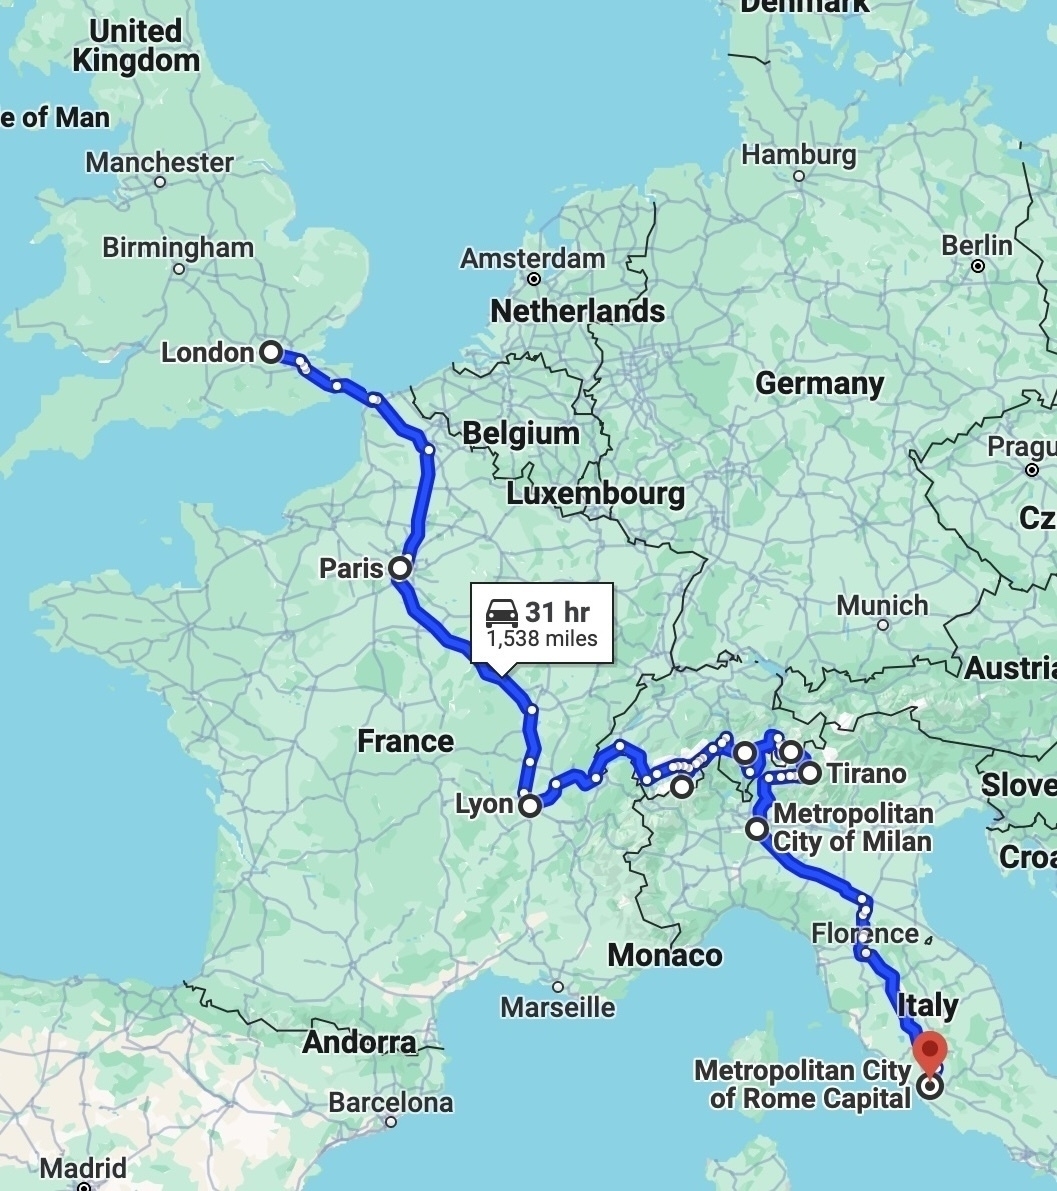 Auto-generated description: A route map shows a 1,538-mile driving journey from London, United Kingdom, through France and Switzerland, ending in Rome, Italy.